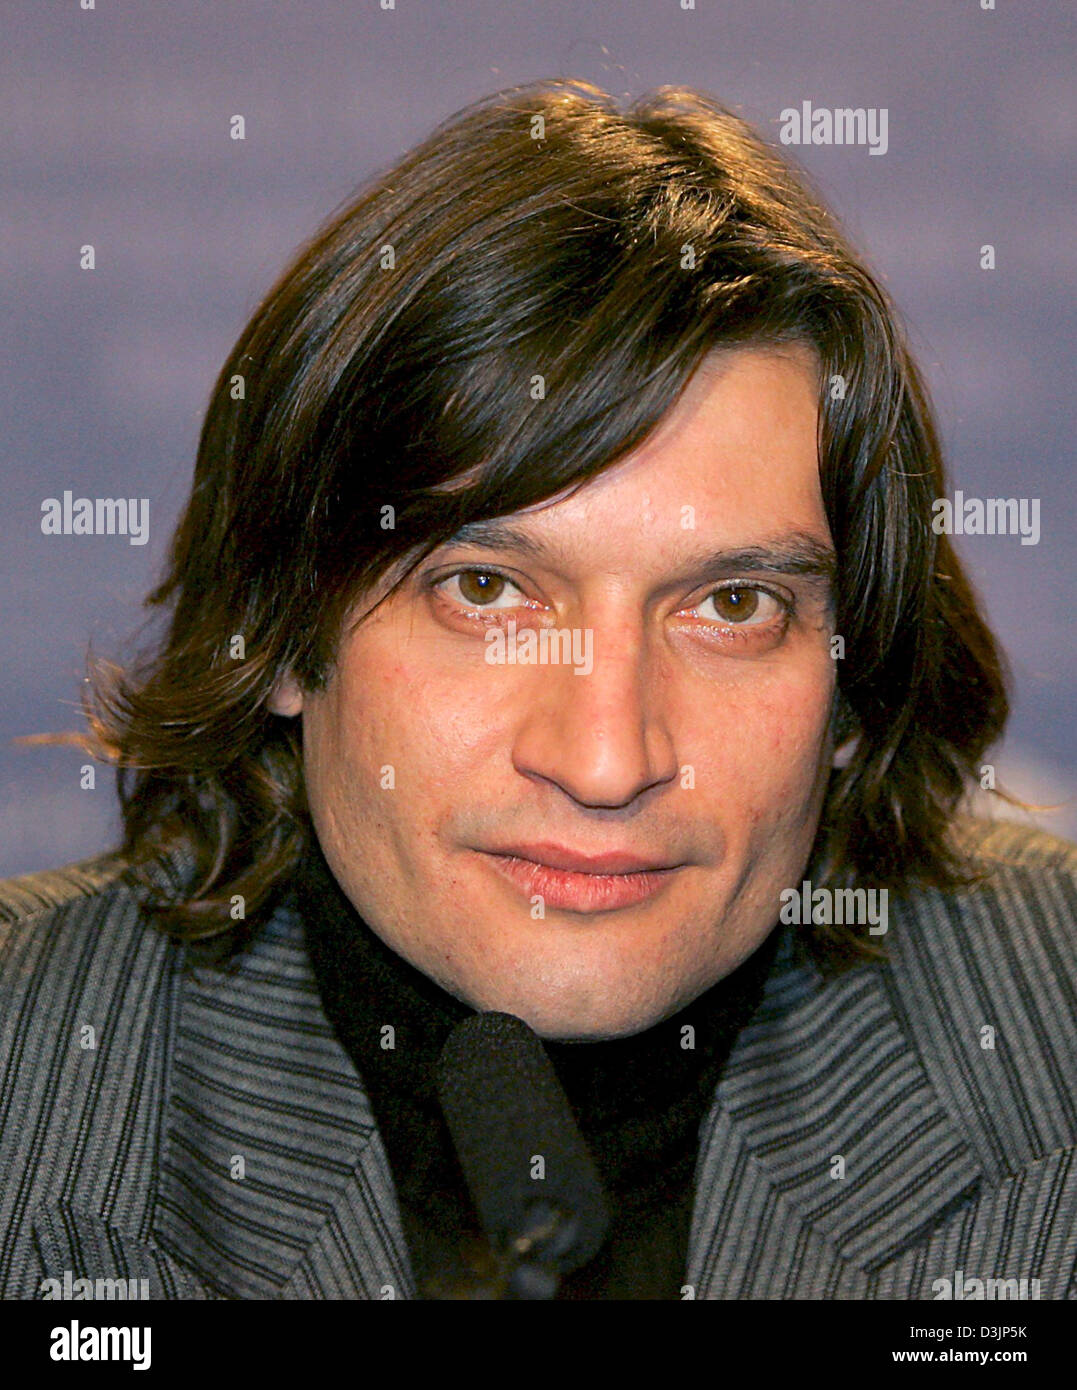 (dpa) - Actor Ivan Franek arrives for the presentation of the film 'Provincia Meccanica' (Italy) during the 55th Berlinale international film festival in Berlin, Germany, 12 February 2005. A total of 21 films compete for the Golden and Silver Bear prizes at the Berlinale. Stock Photo